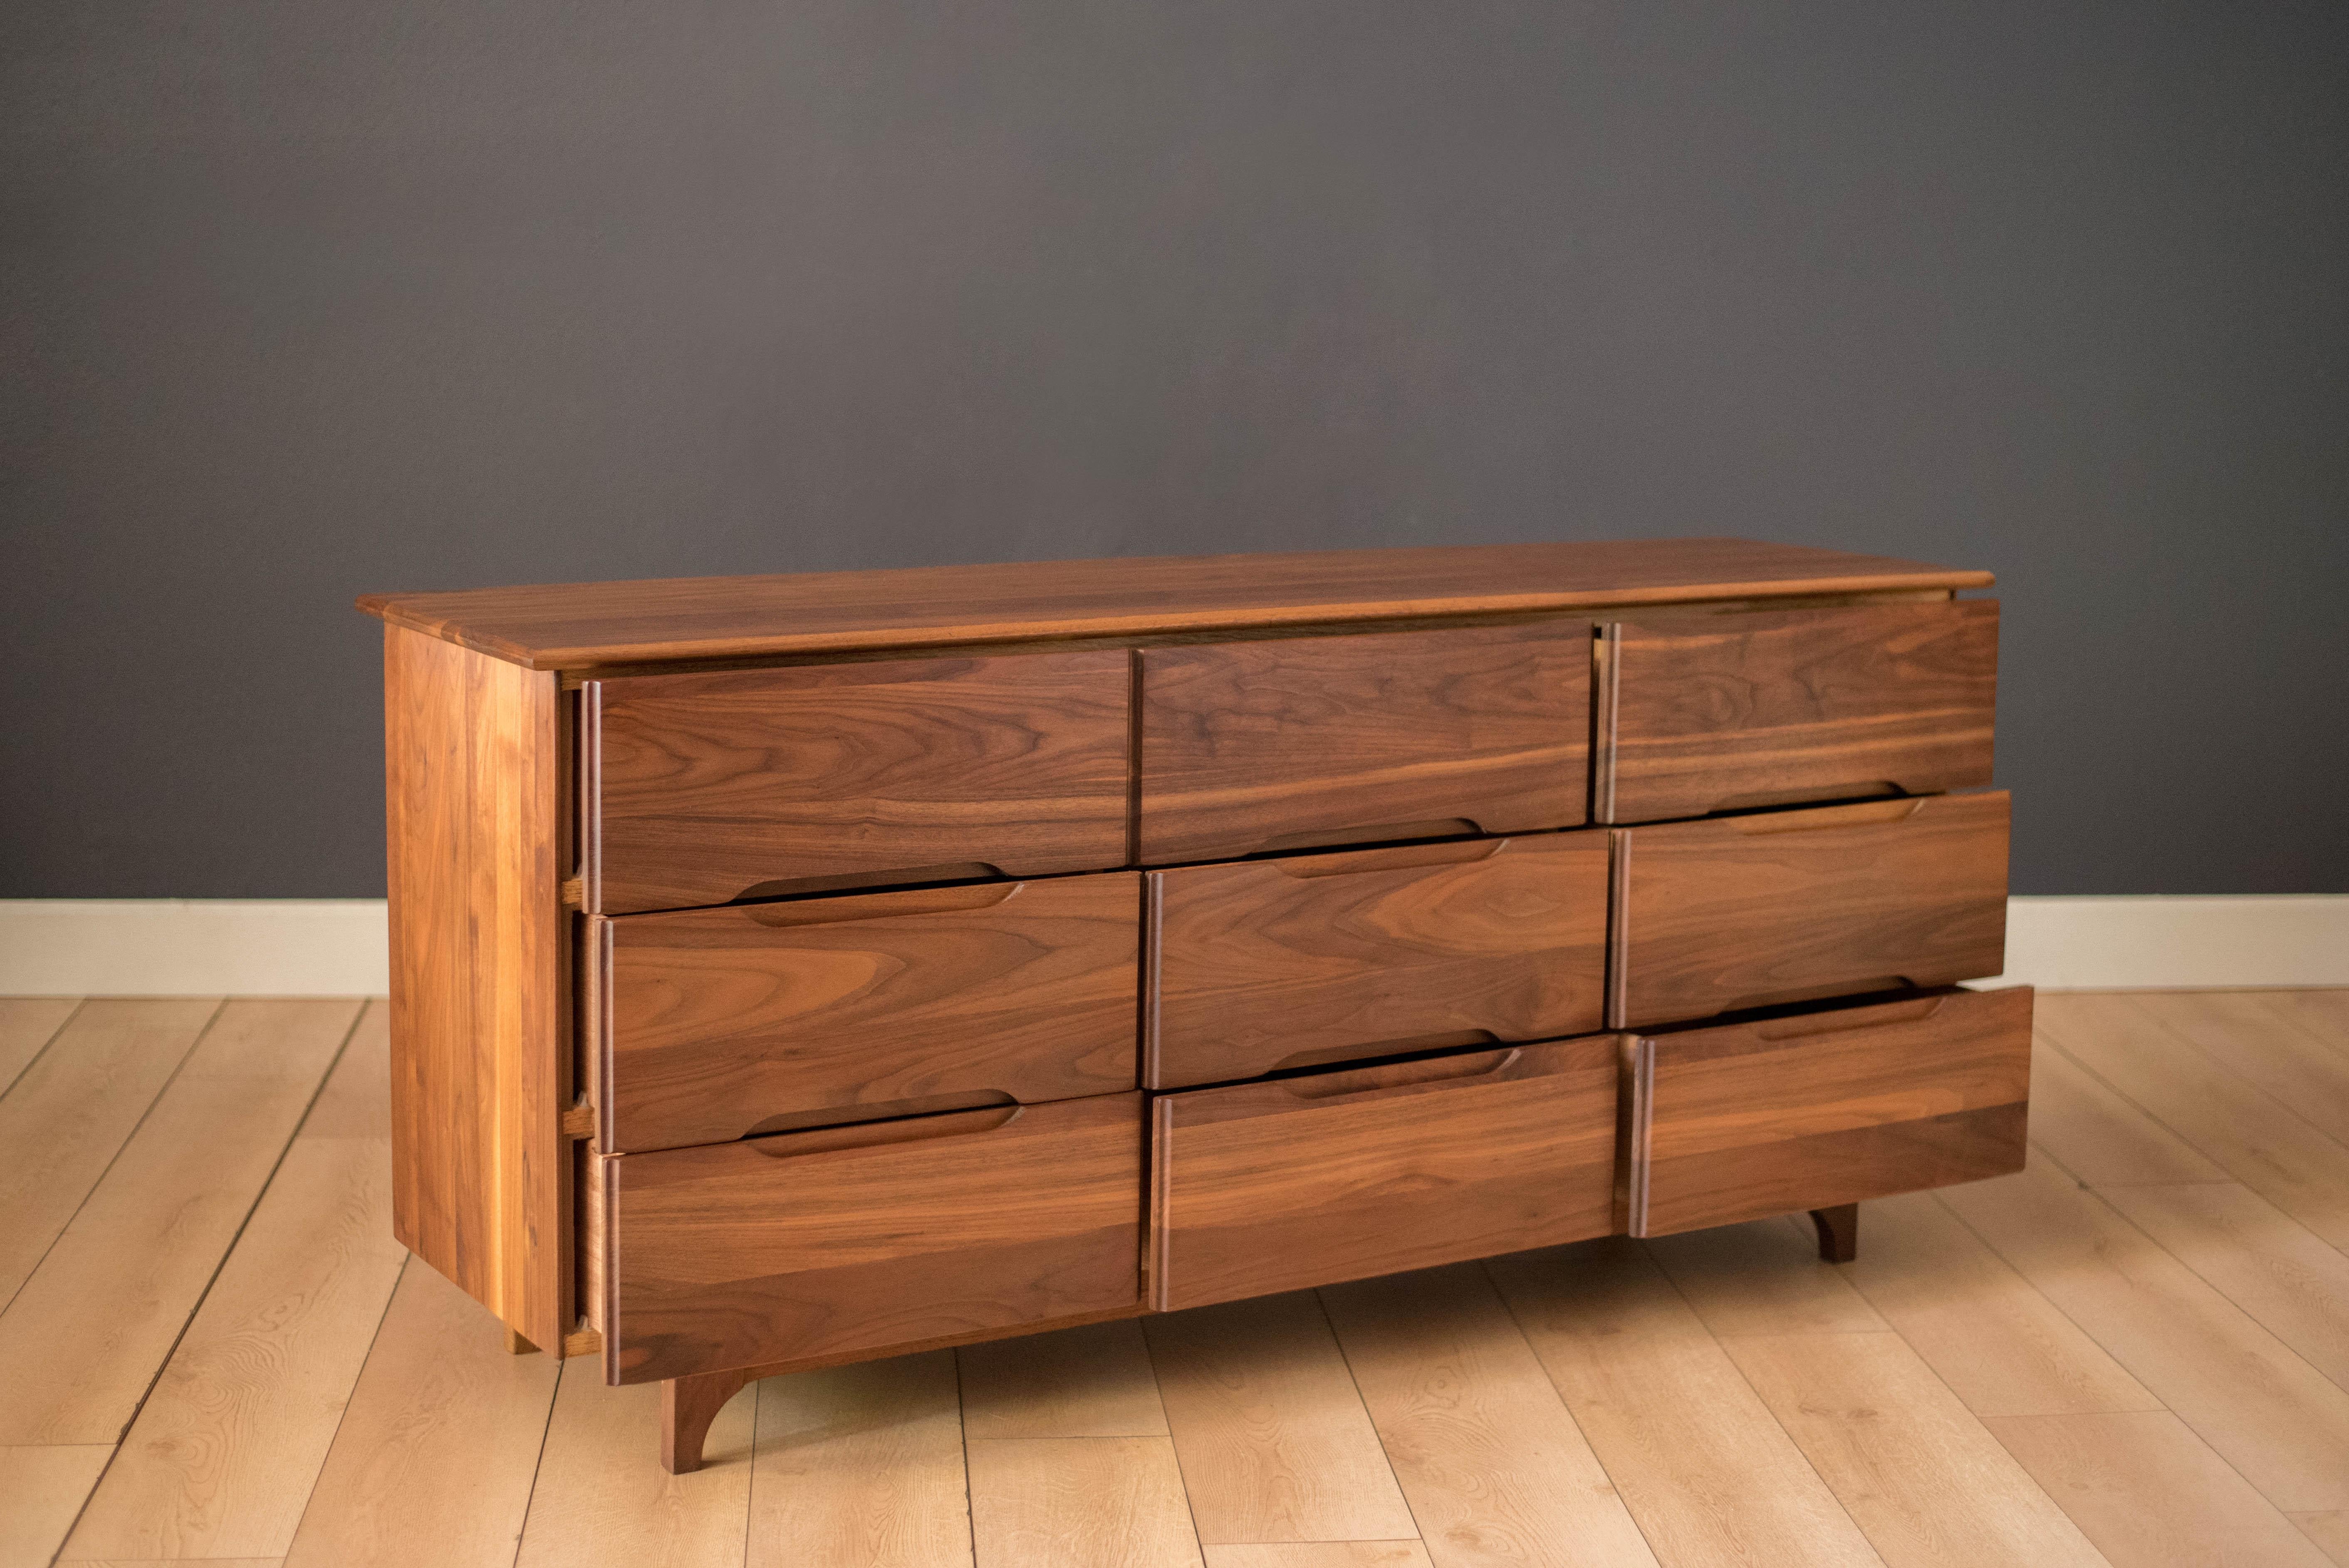 Vintage dresser chest in solid planked walnut, circa 1960s. This piece features a stunning blend of walnut grains and includes nine storage drawers.